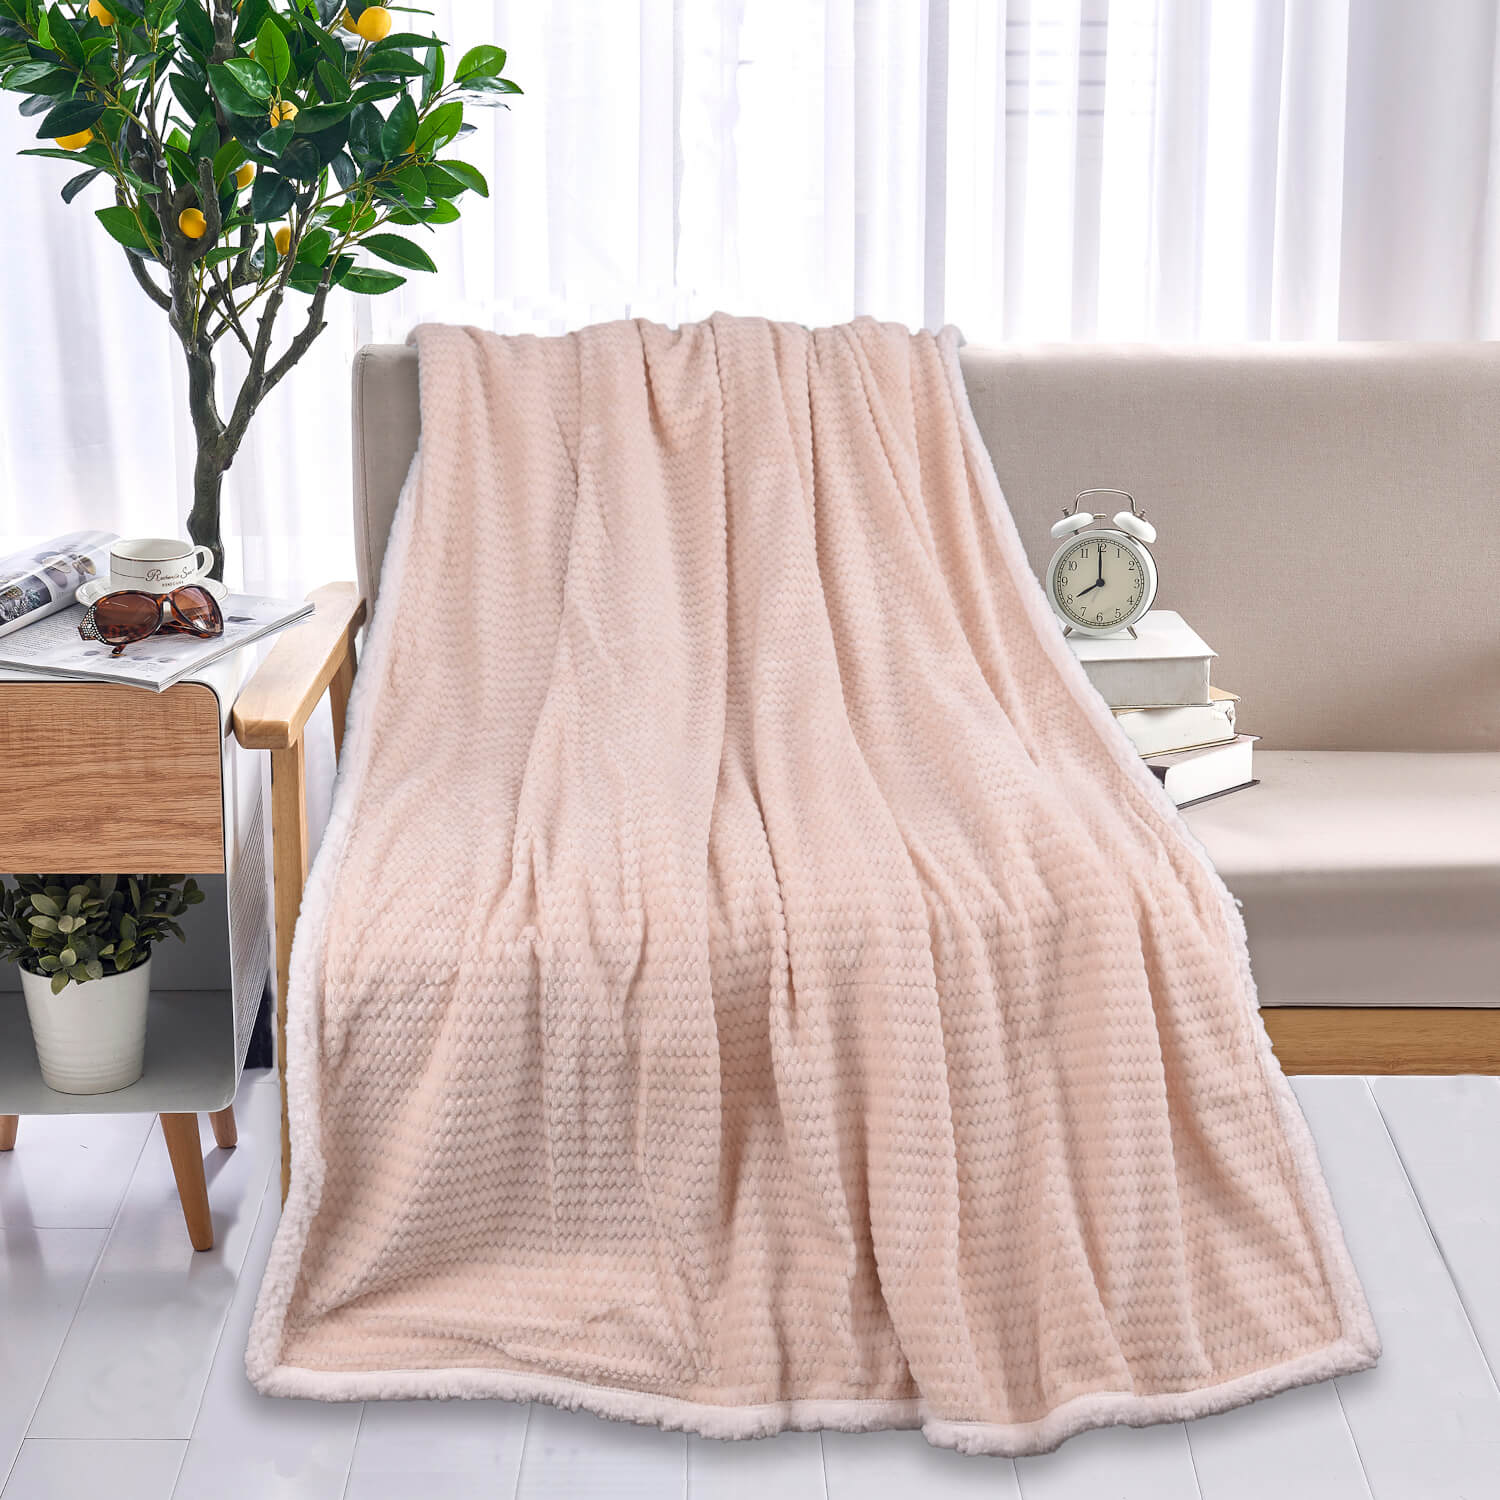 The Home Bedroom Double Sided Throw 127cm x 152cm - Beige 1 Shaws Department Stores